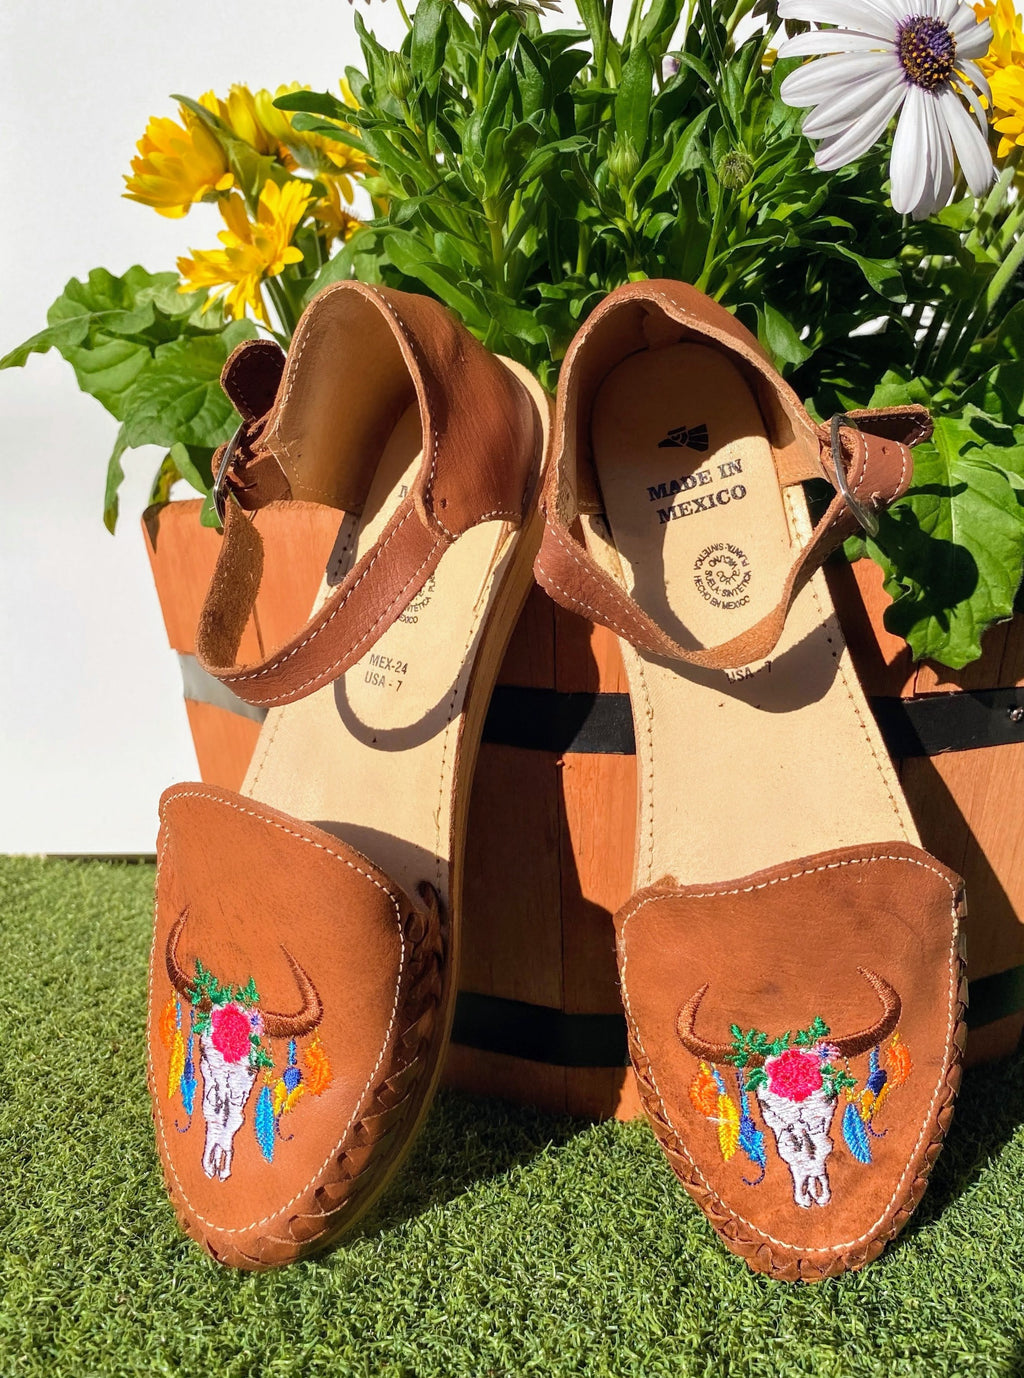 Women closed toe huarache sandals with buckle strap and embroidered bull design.